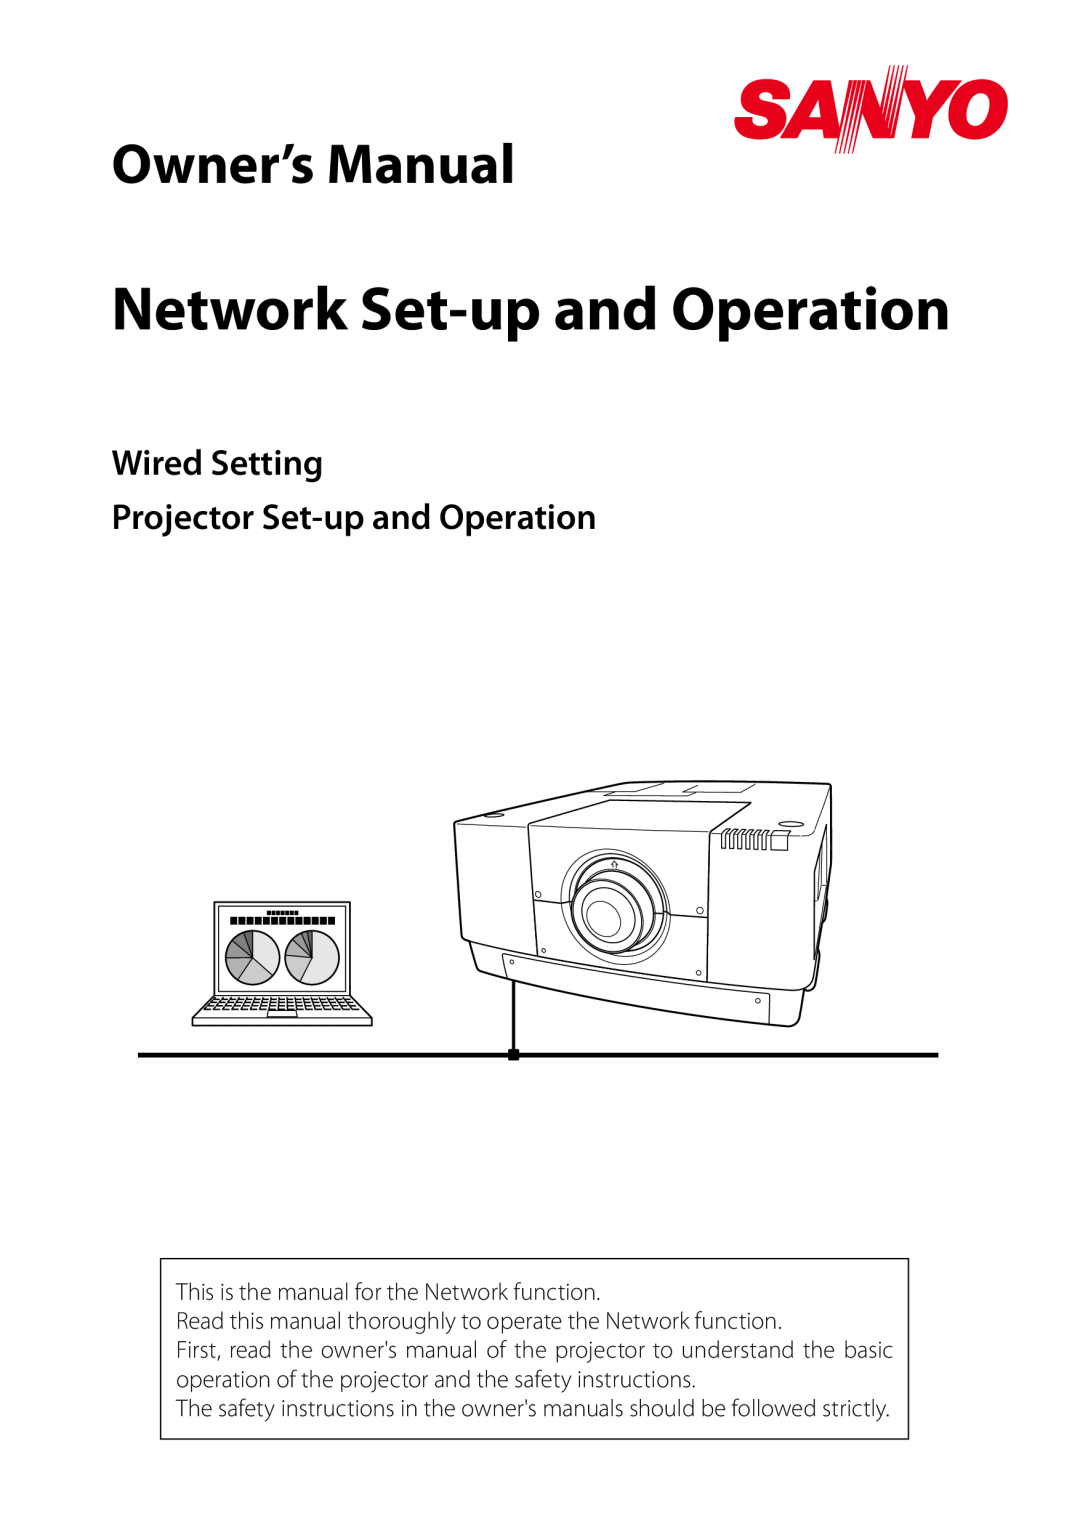 Sanyo owner manual Wired Setting Projector Set-up and Operation, Network Set-up and Operation 